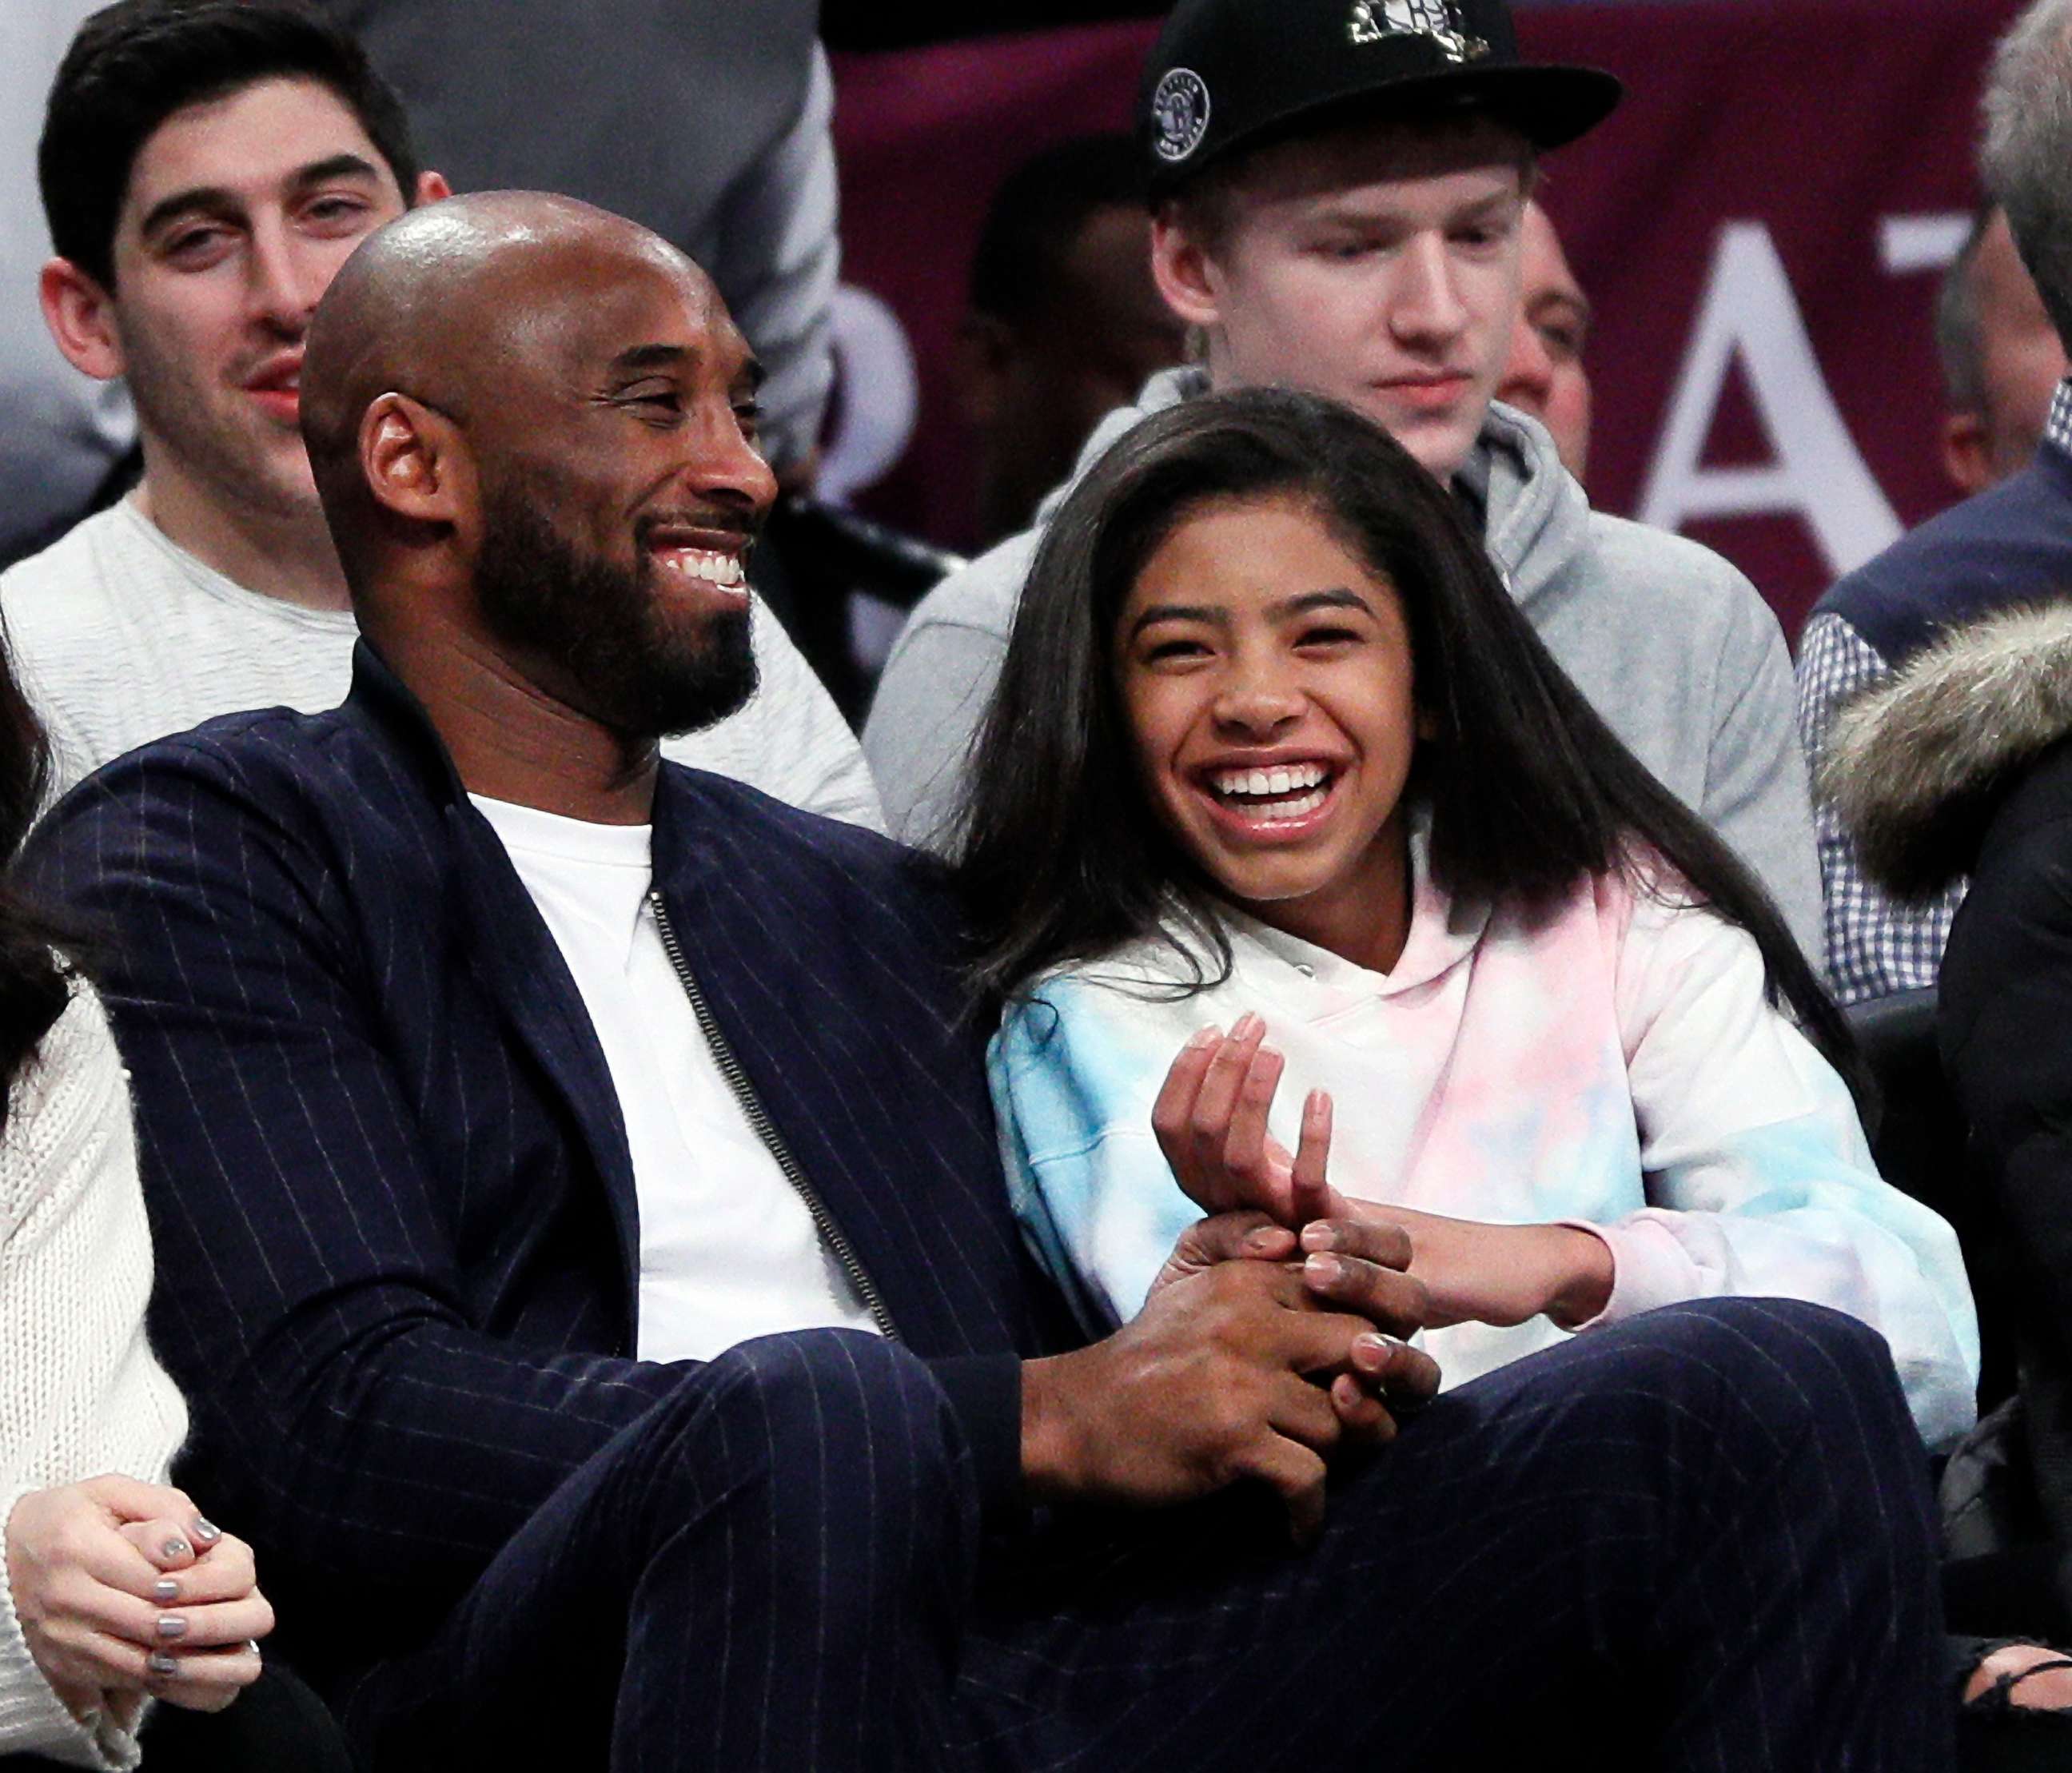 PHOTO: Retired NBA star Kobe Bryant and his daughter Gigi, watch an NBA basketball game, Dec. 21, 2019, at Barclays Center in New York City.